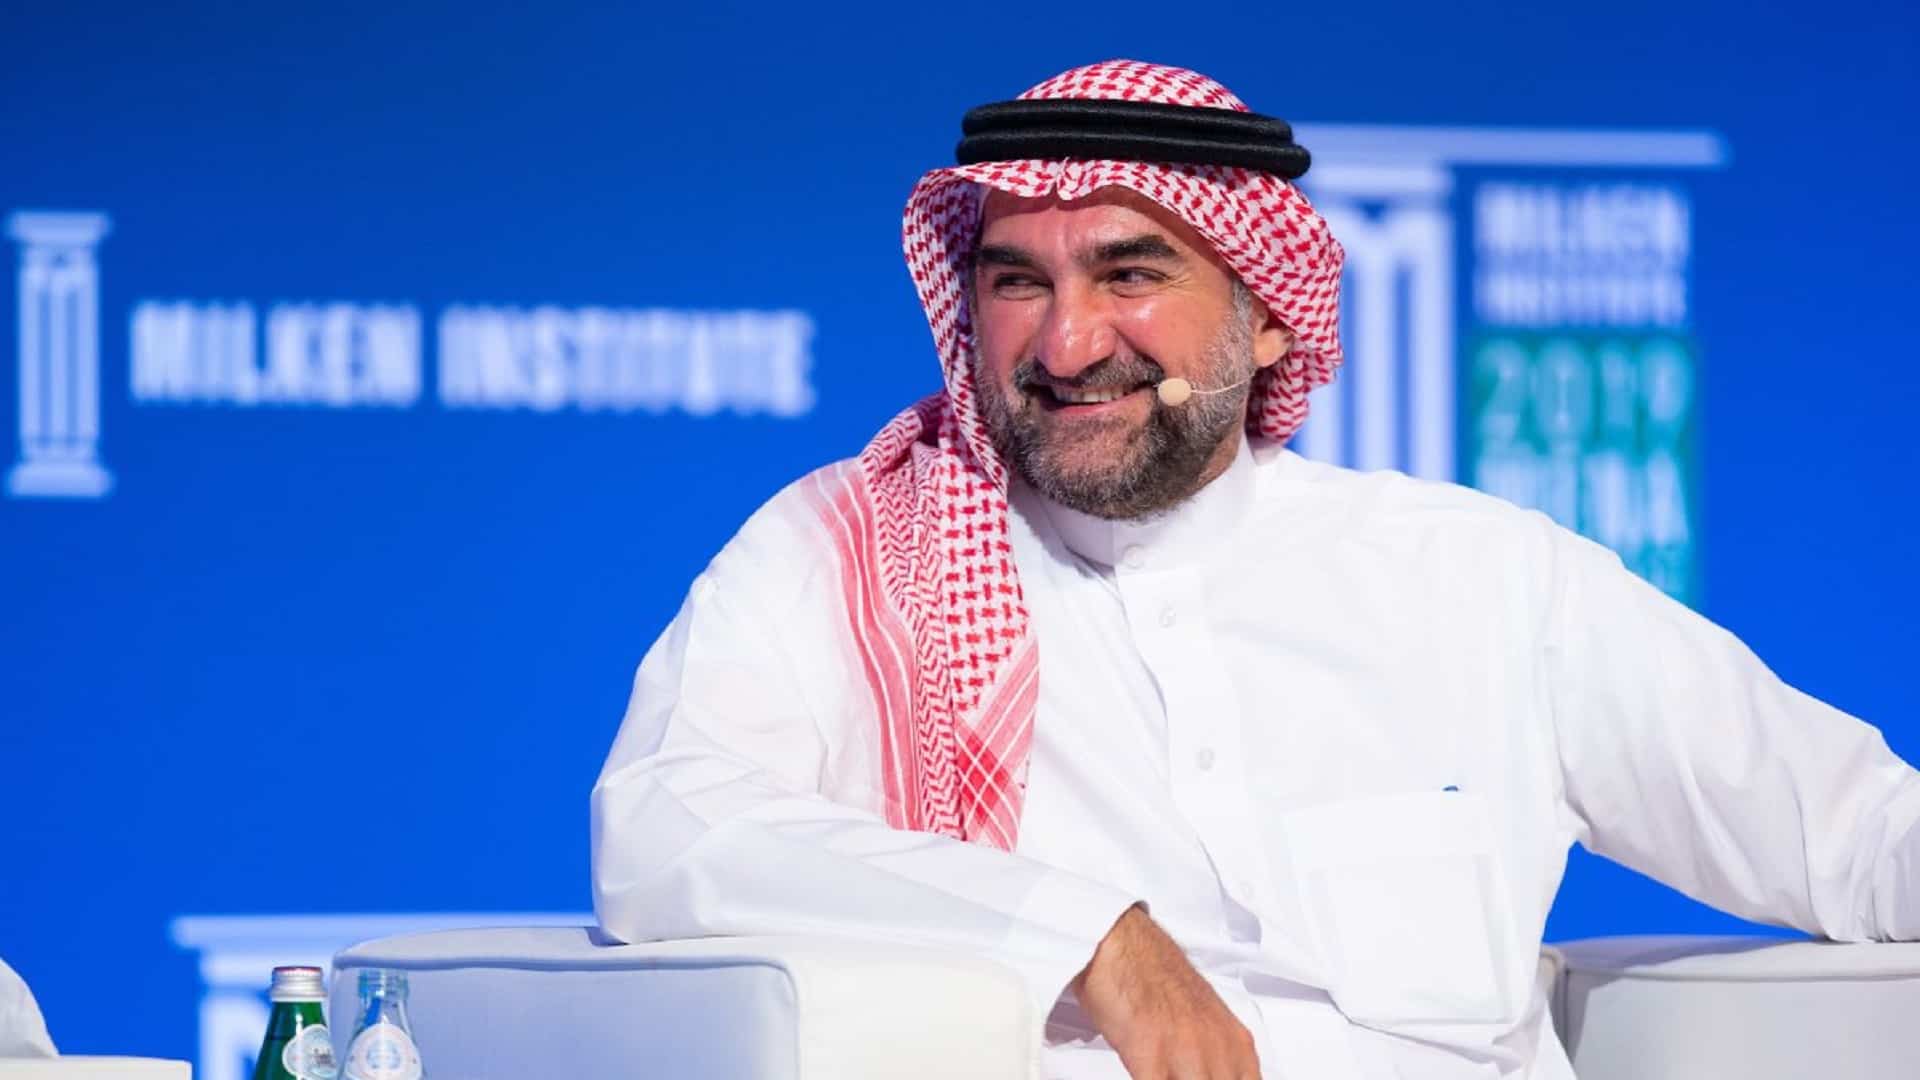 Yasir bin Othman Al-Rumayyan is a Saudi businessman who is Governor of the Public Investment Fund